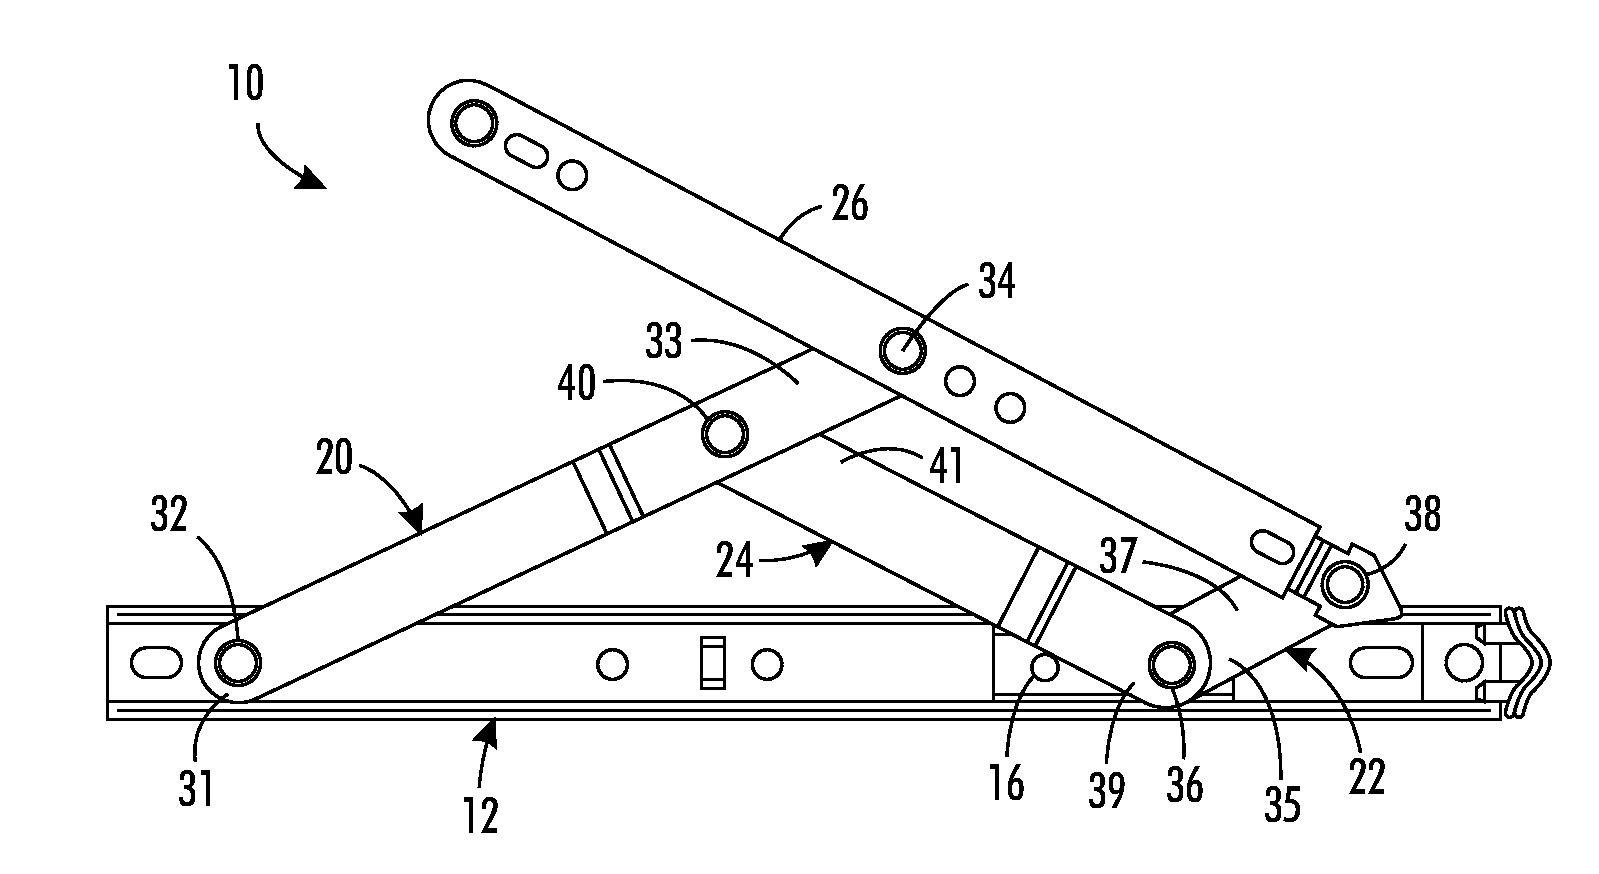 Channel-mounted 4-bar linkage assembly